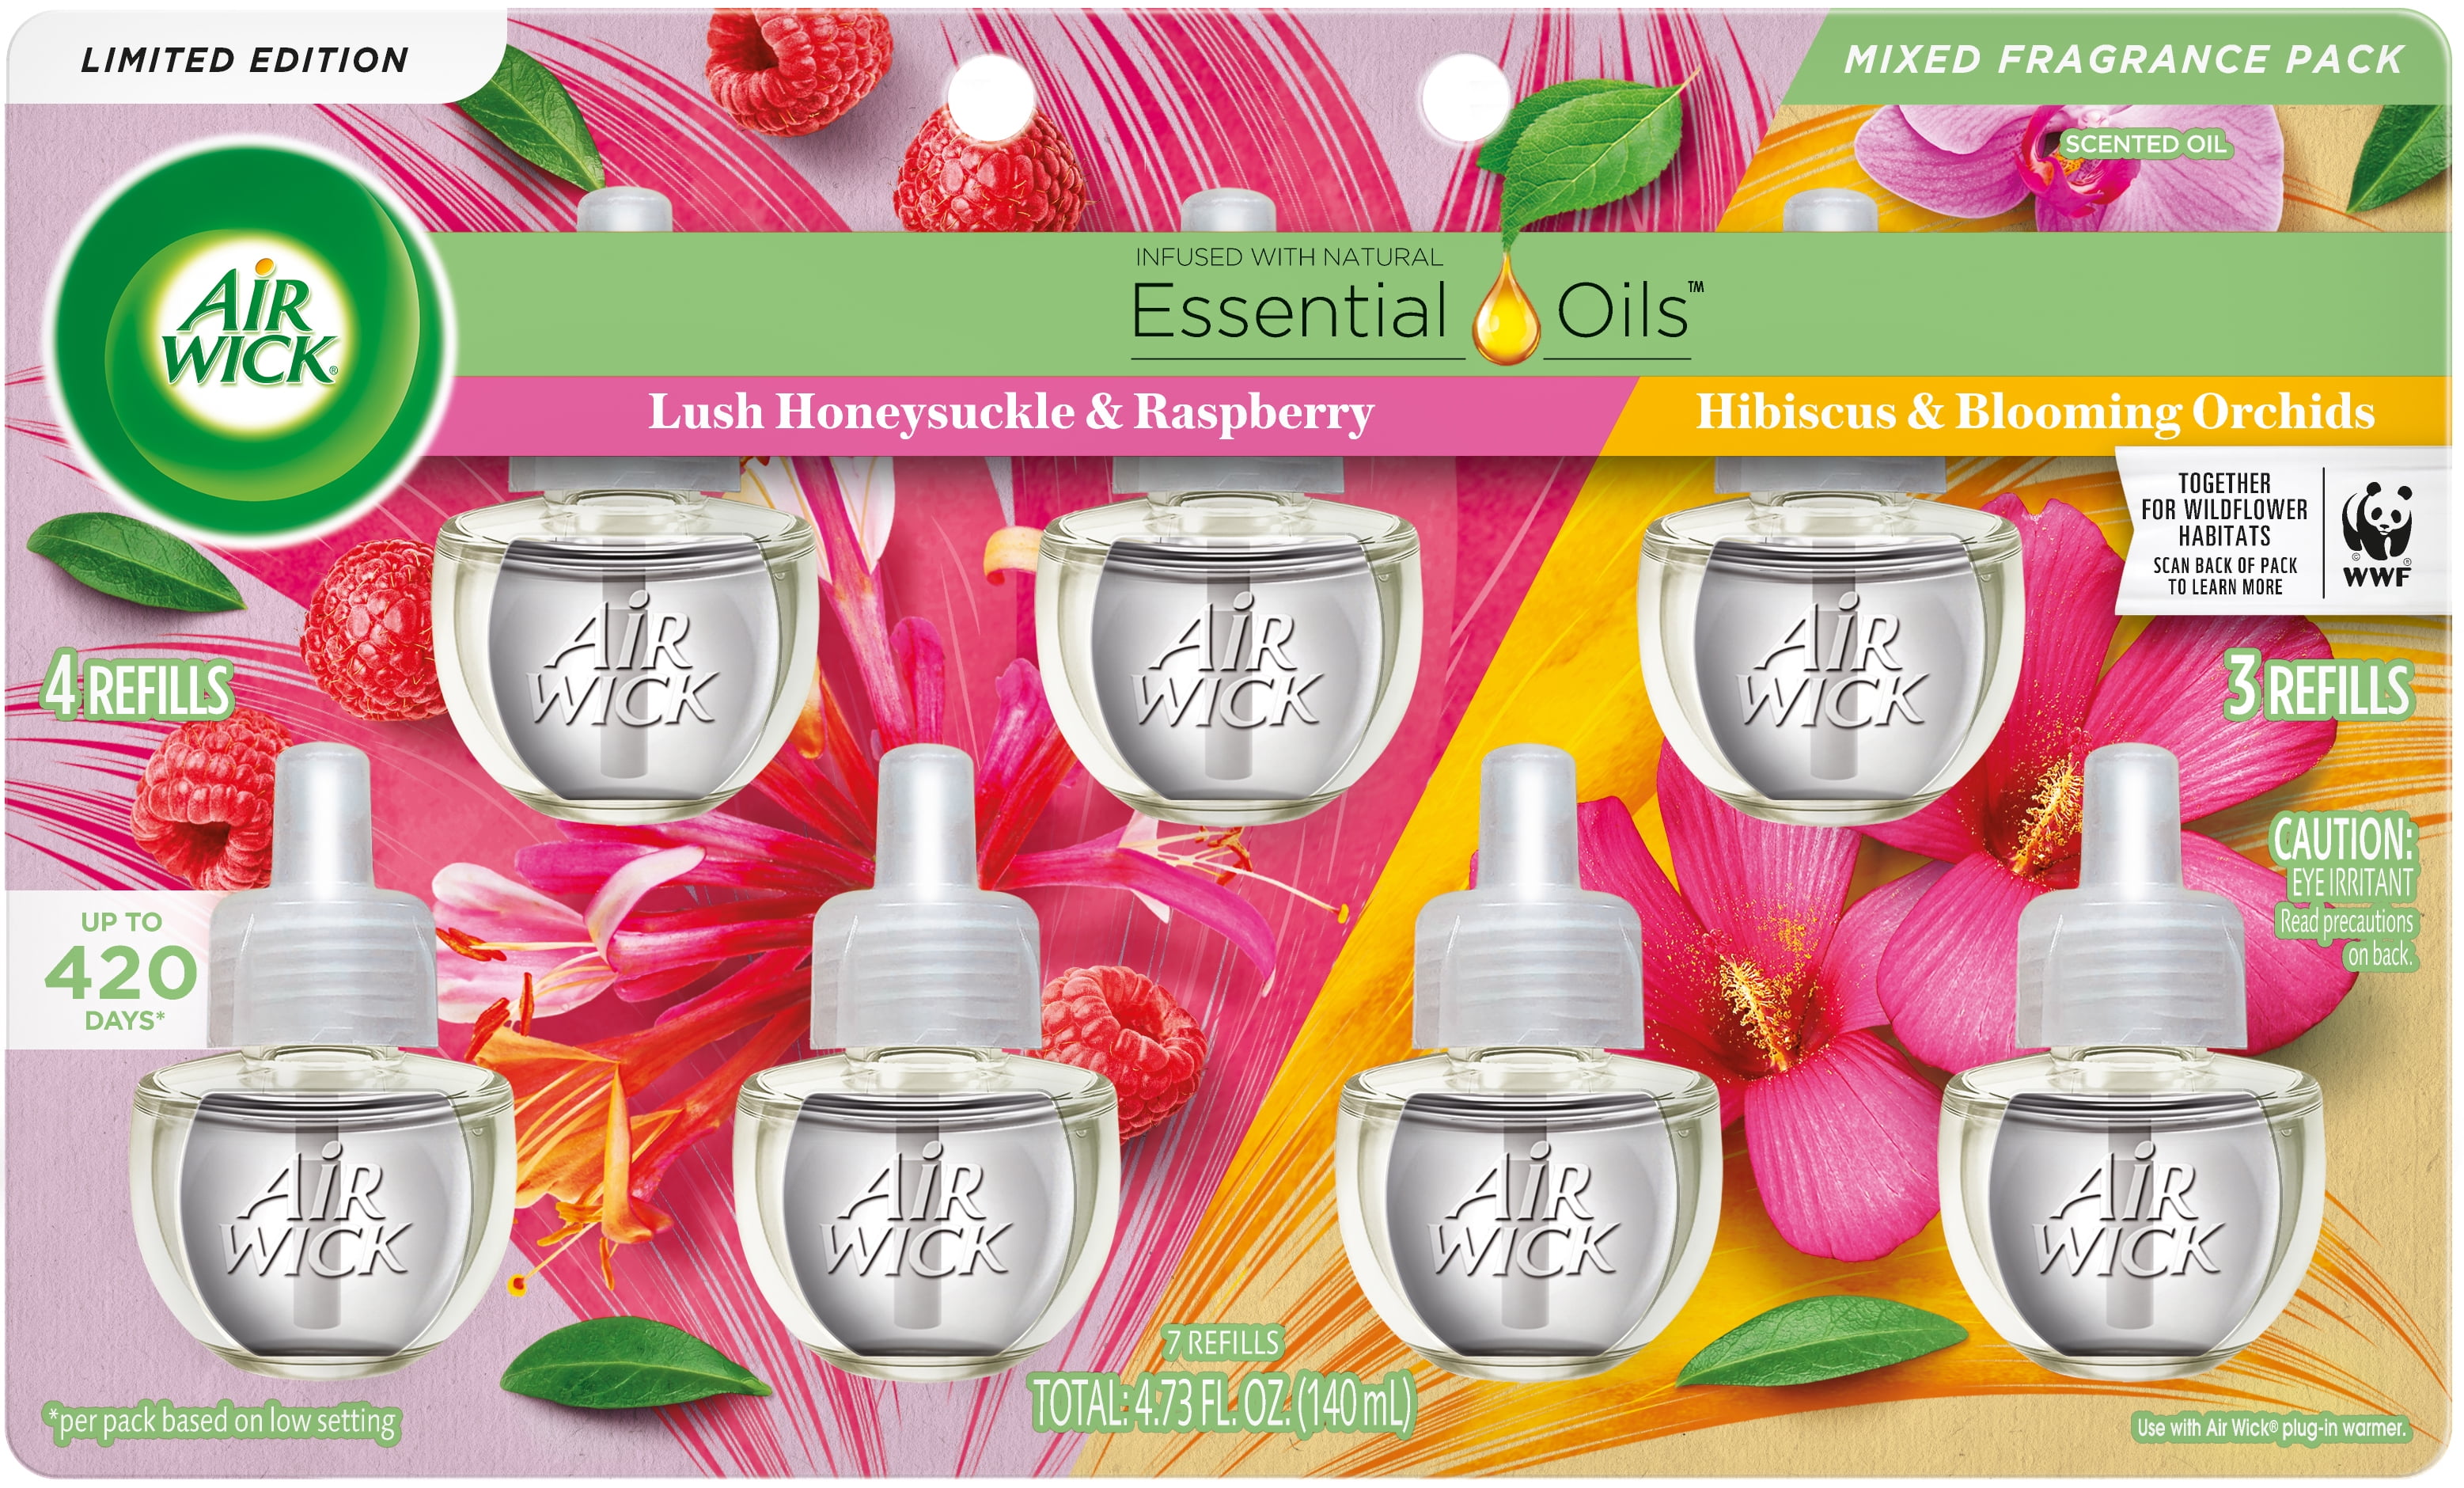 Air Wick Plug in Scented Oil Refill, 7ct, Lush Honeysuckle & Raspberry + Hibiscus & Blooming Orchids. Air Freshener, Essential Oils